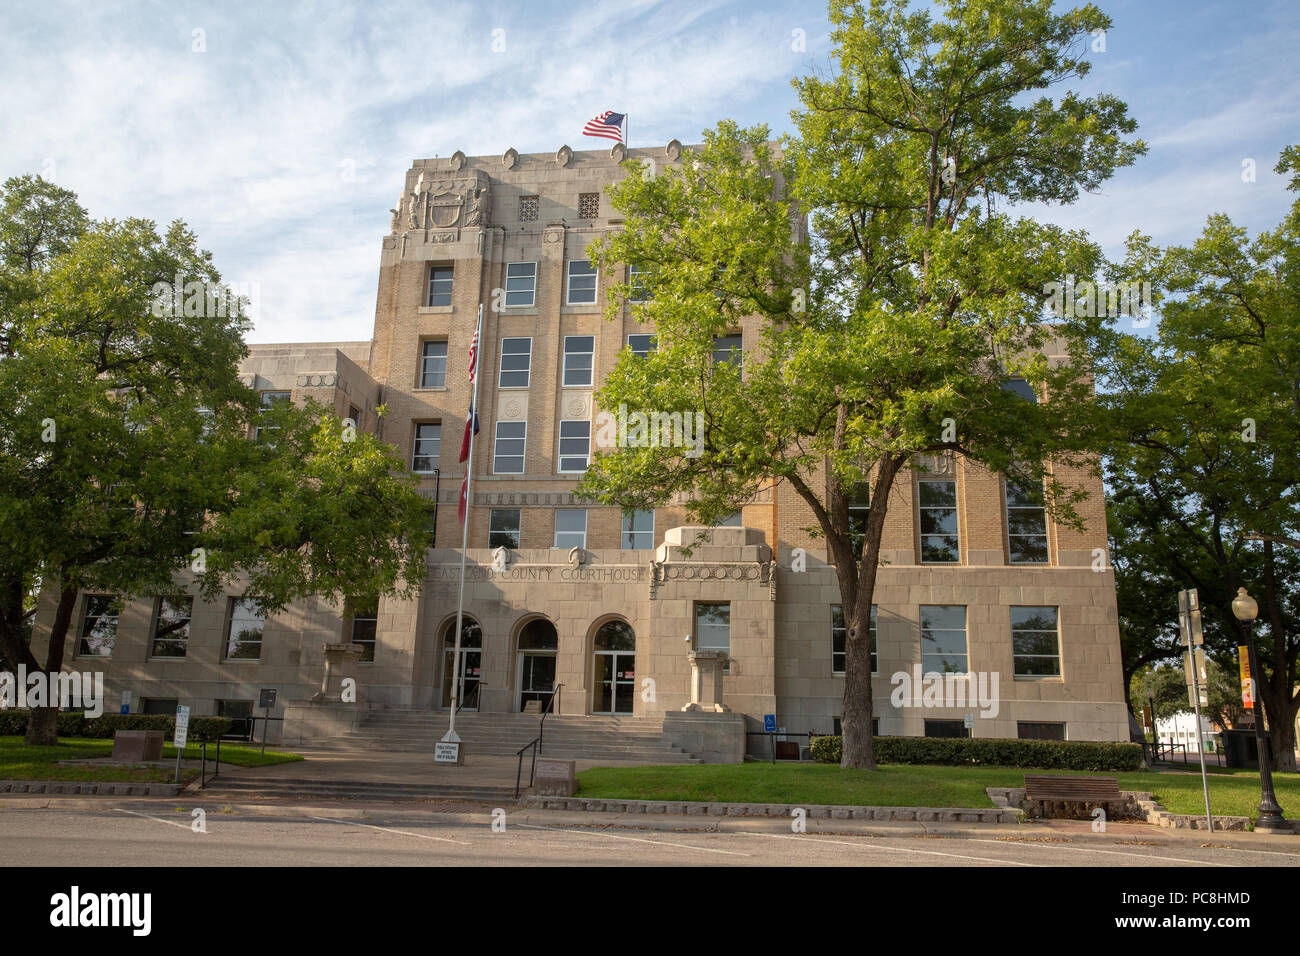 The 1928 Eastland county courthouse in Eastland Texas built in Modern-Art Deco style. Stock Photo